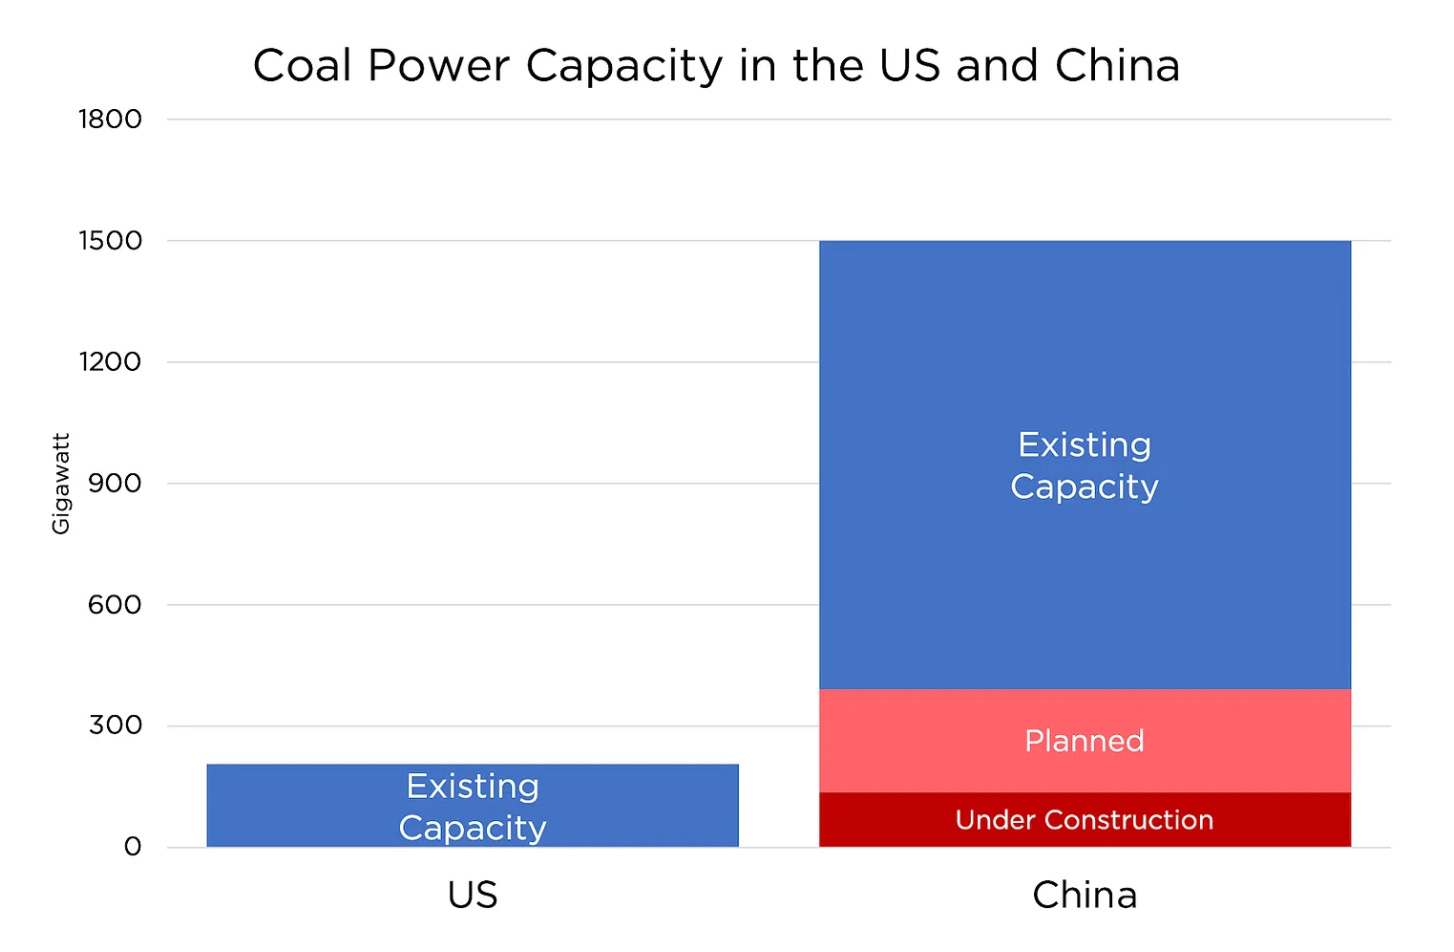 IMAGE 7 - Coal Power Capacity in the US and China